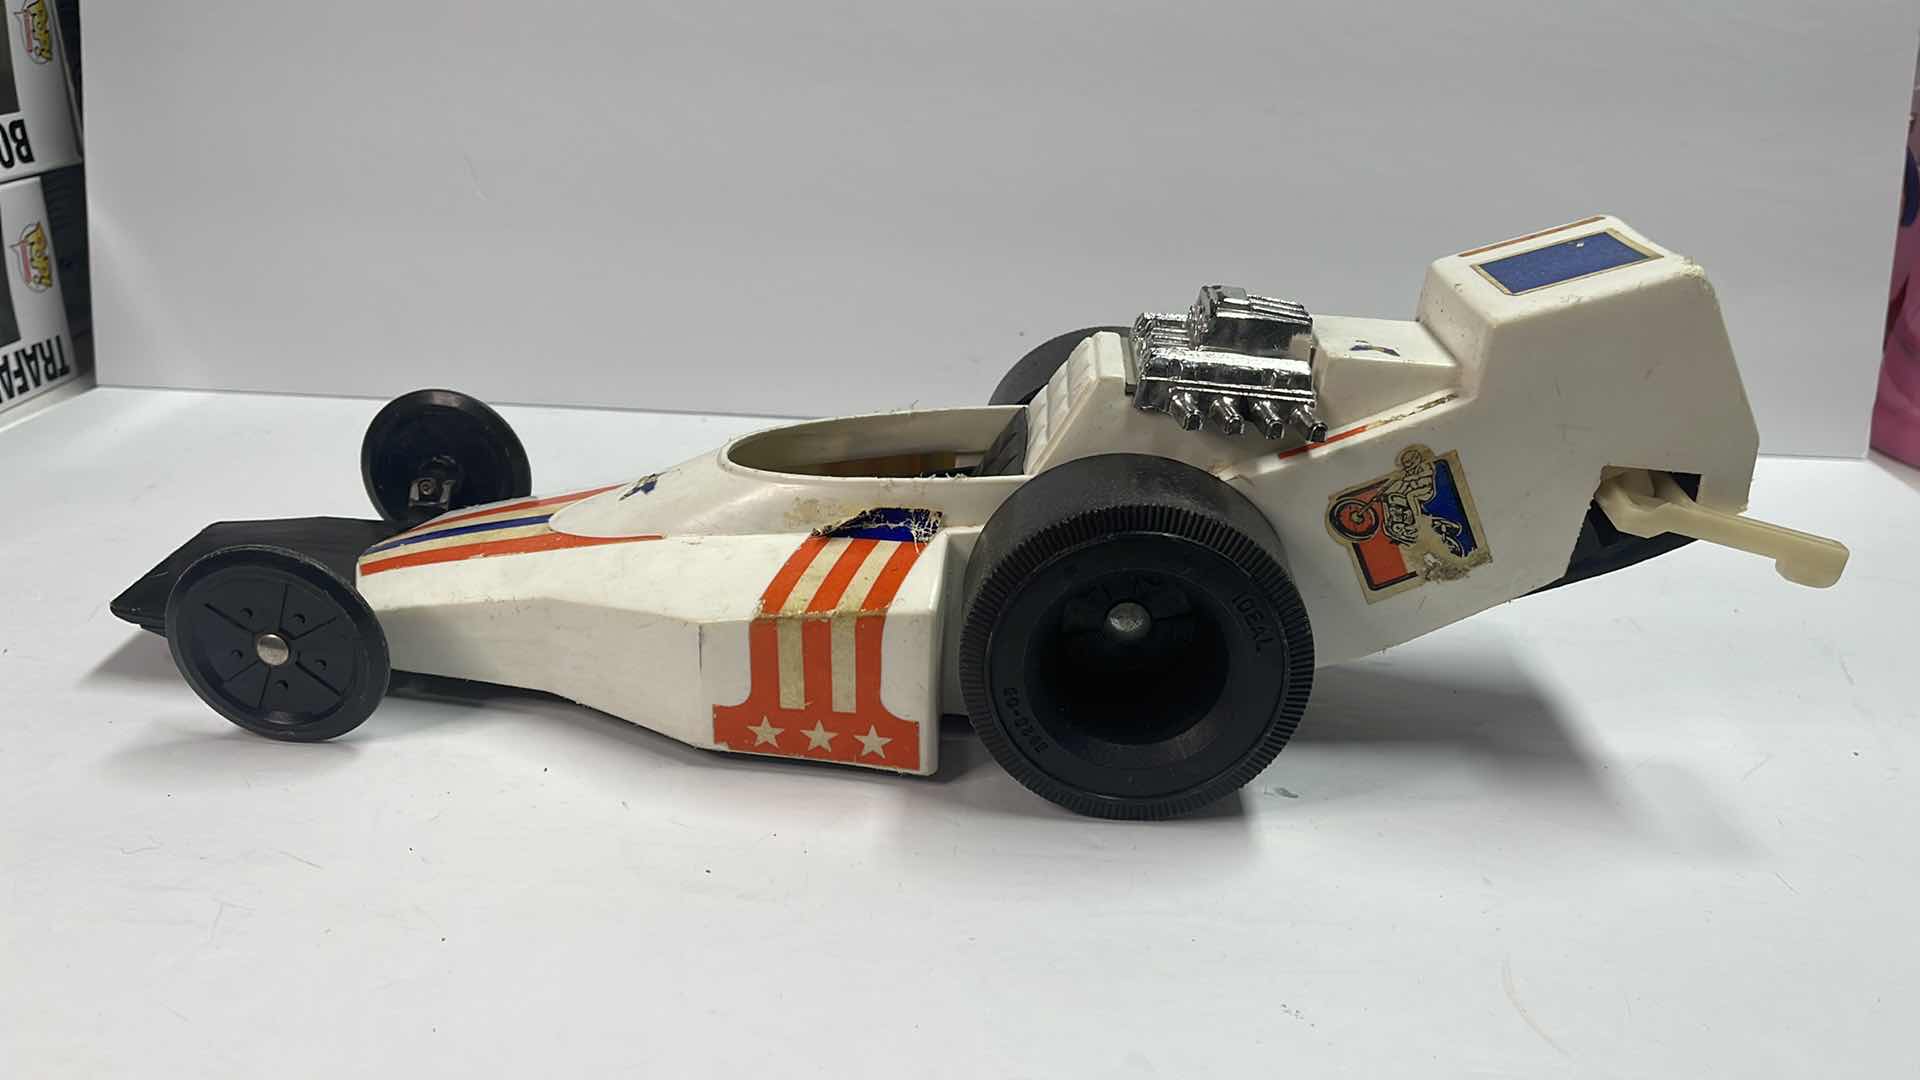 Photo 3 of VINTAGE 1974 EVEL KNIEVEL FORMULA ONE DRAGSTER - PLEASE READ NOTES FOR MORE INFORMATION